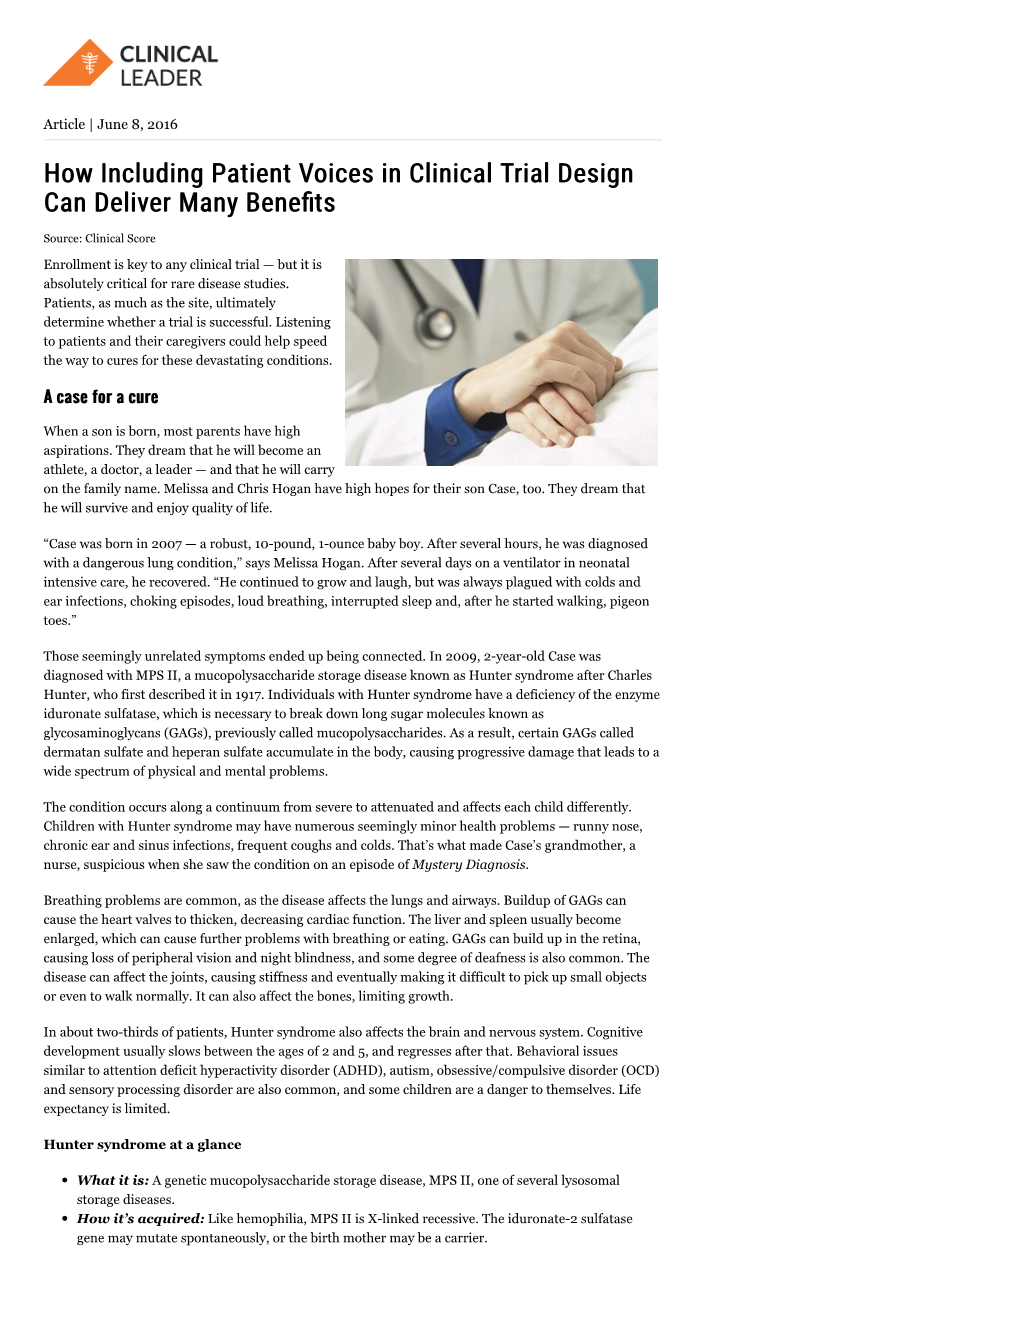 How Including Patient Voices in Clinical Trial Design Can Deliver Many Bene;Ts